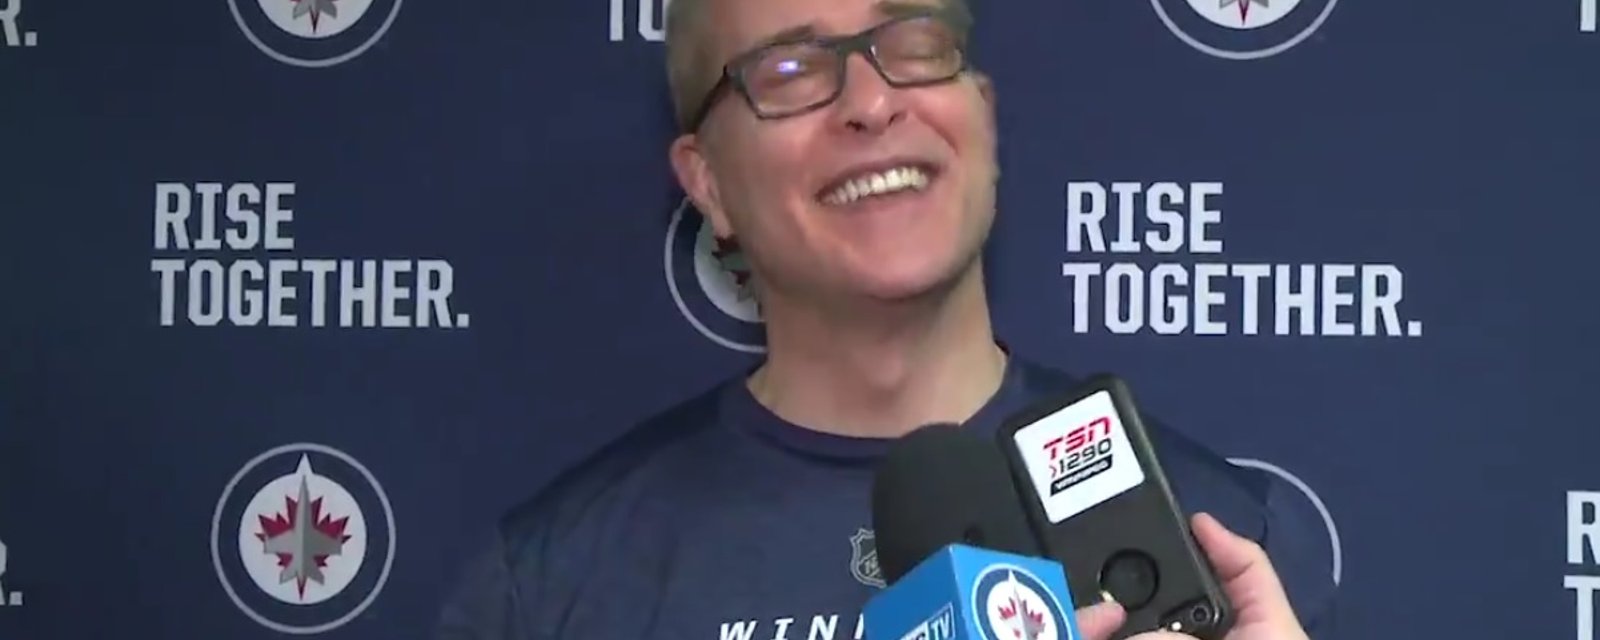 Paul Maurice makes a mistake so bad he turns bright red and ends the interview.